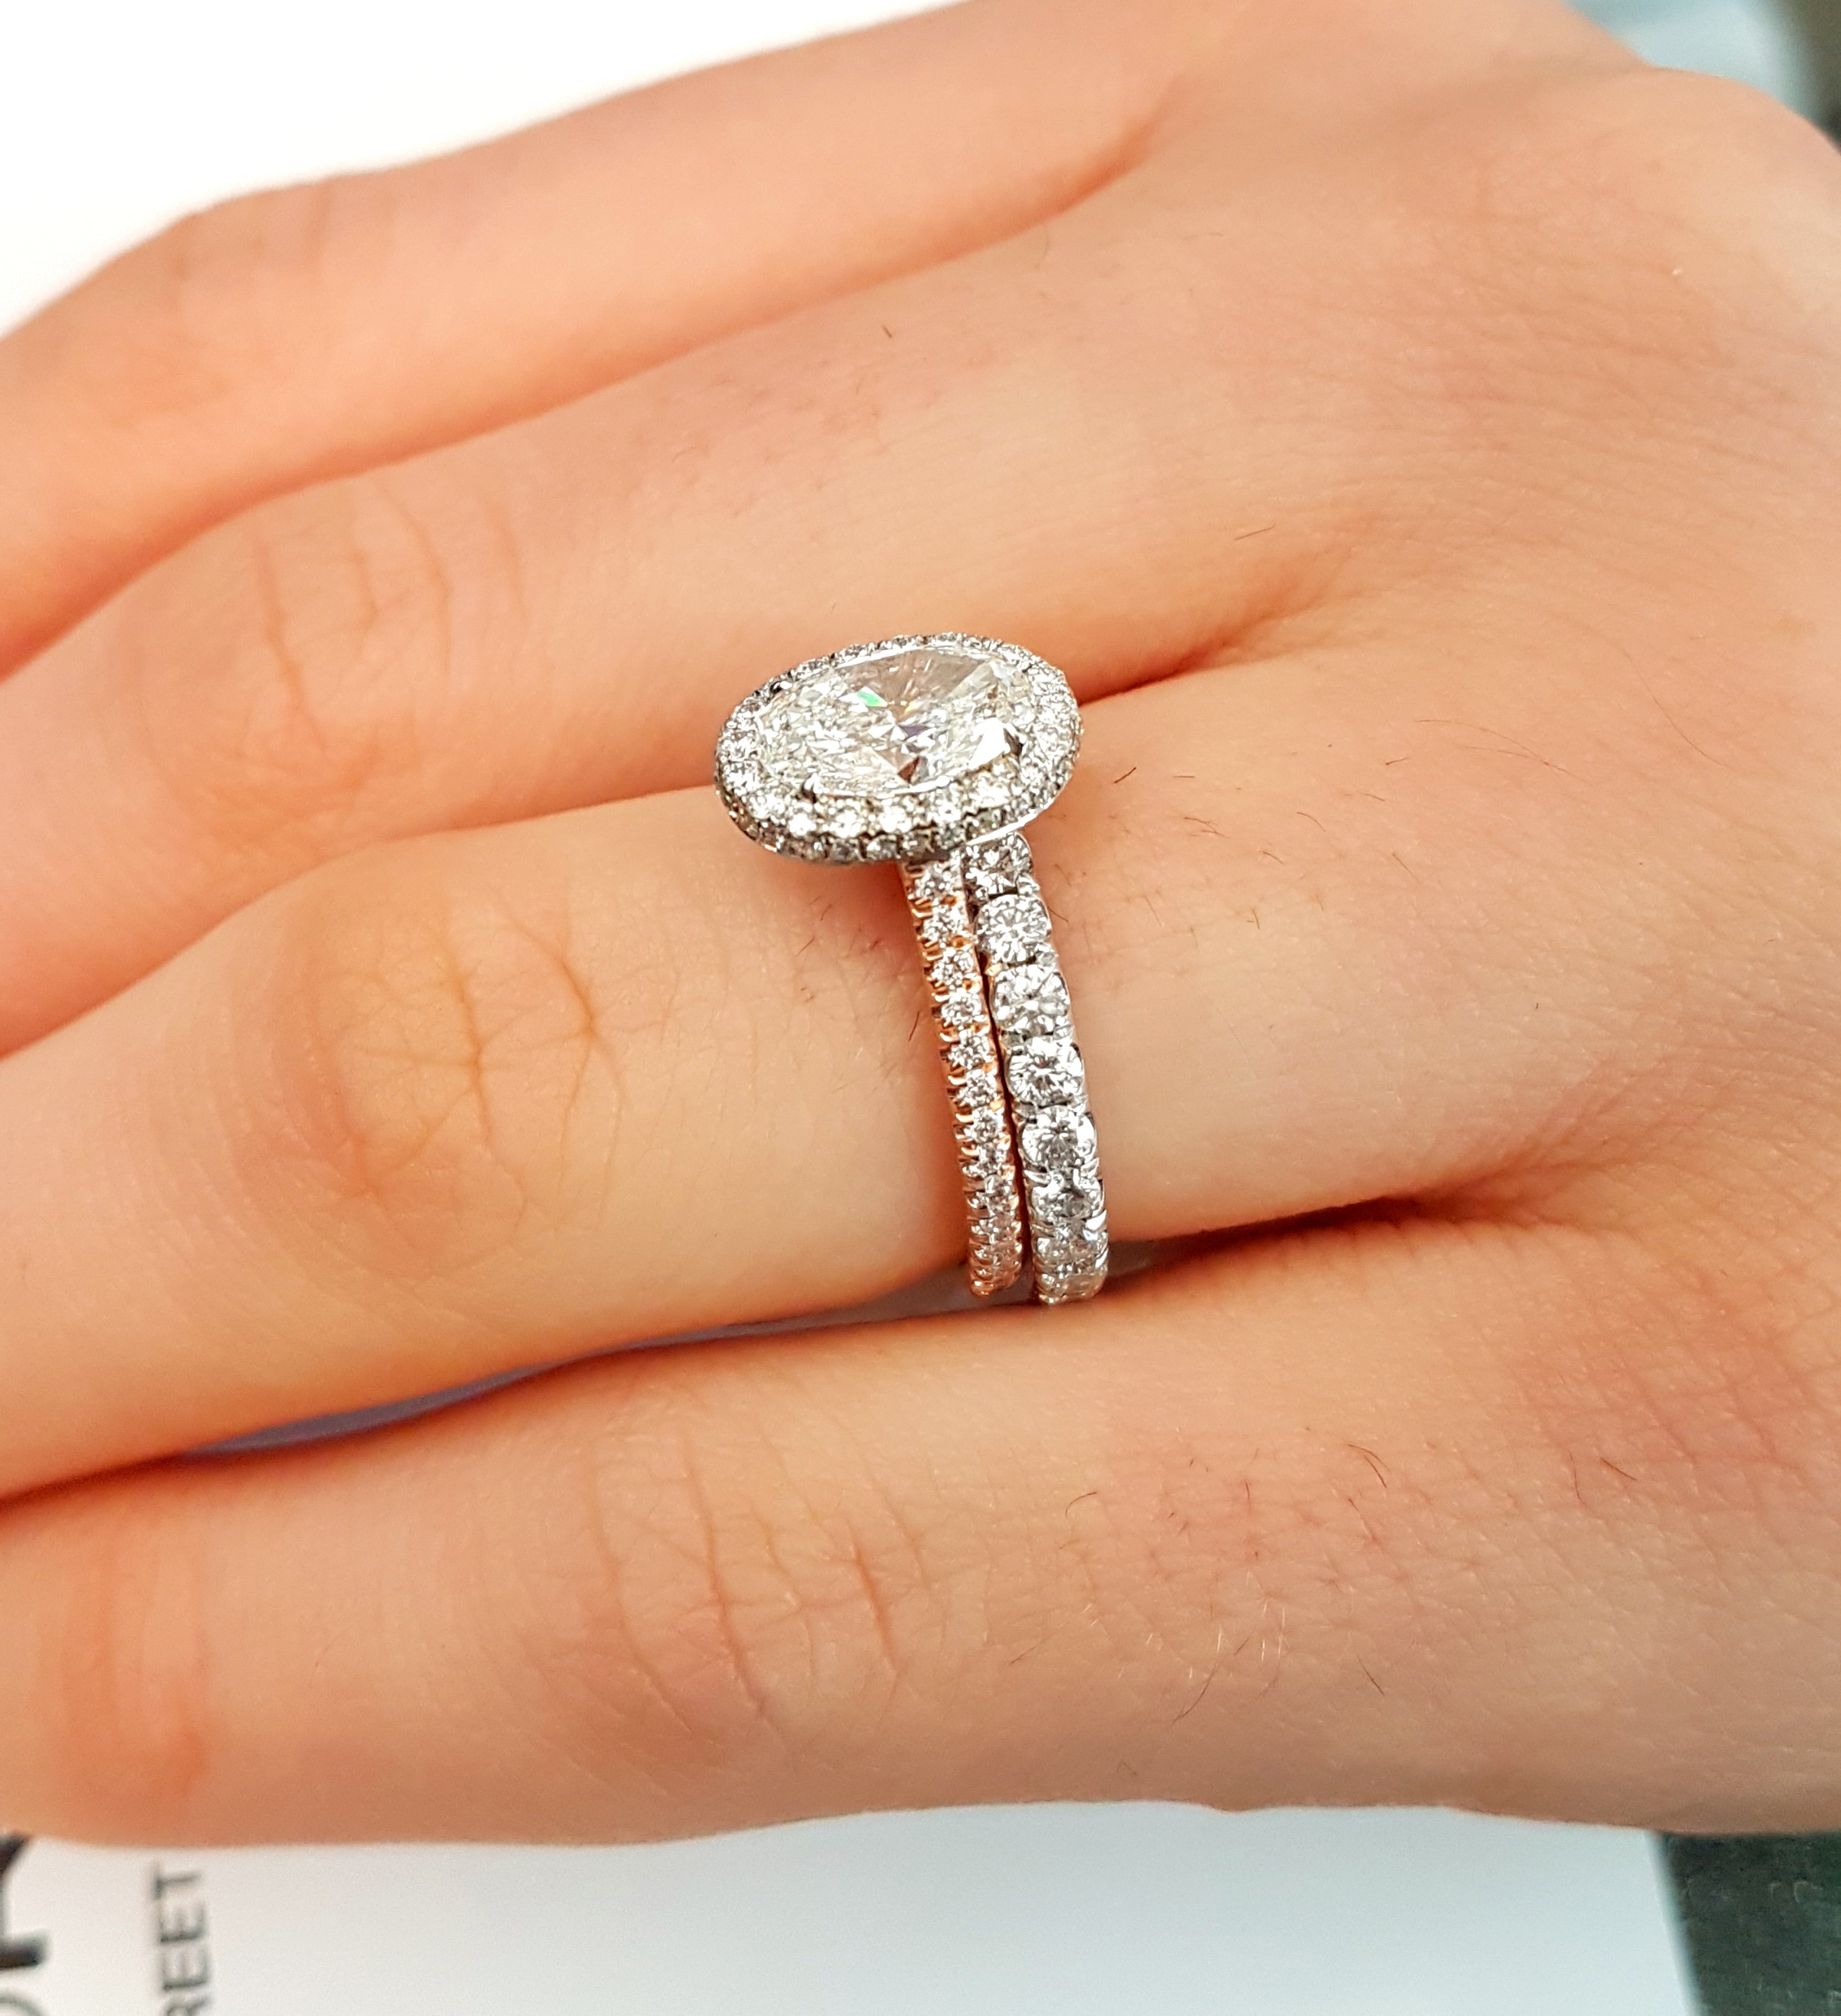 Ring Size: Why the Perfect Fit is 